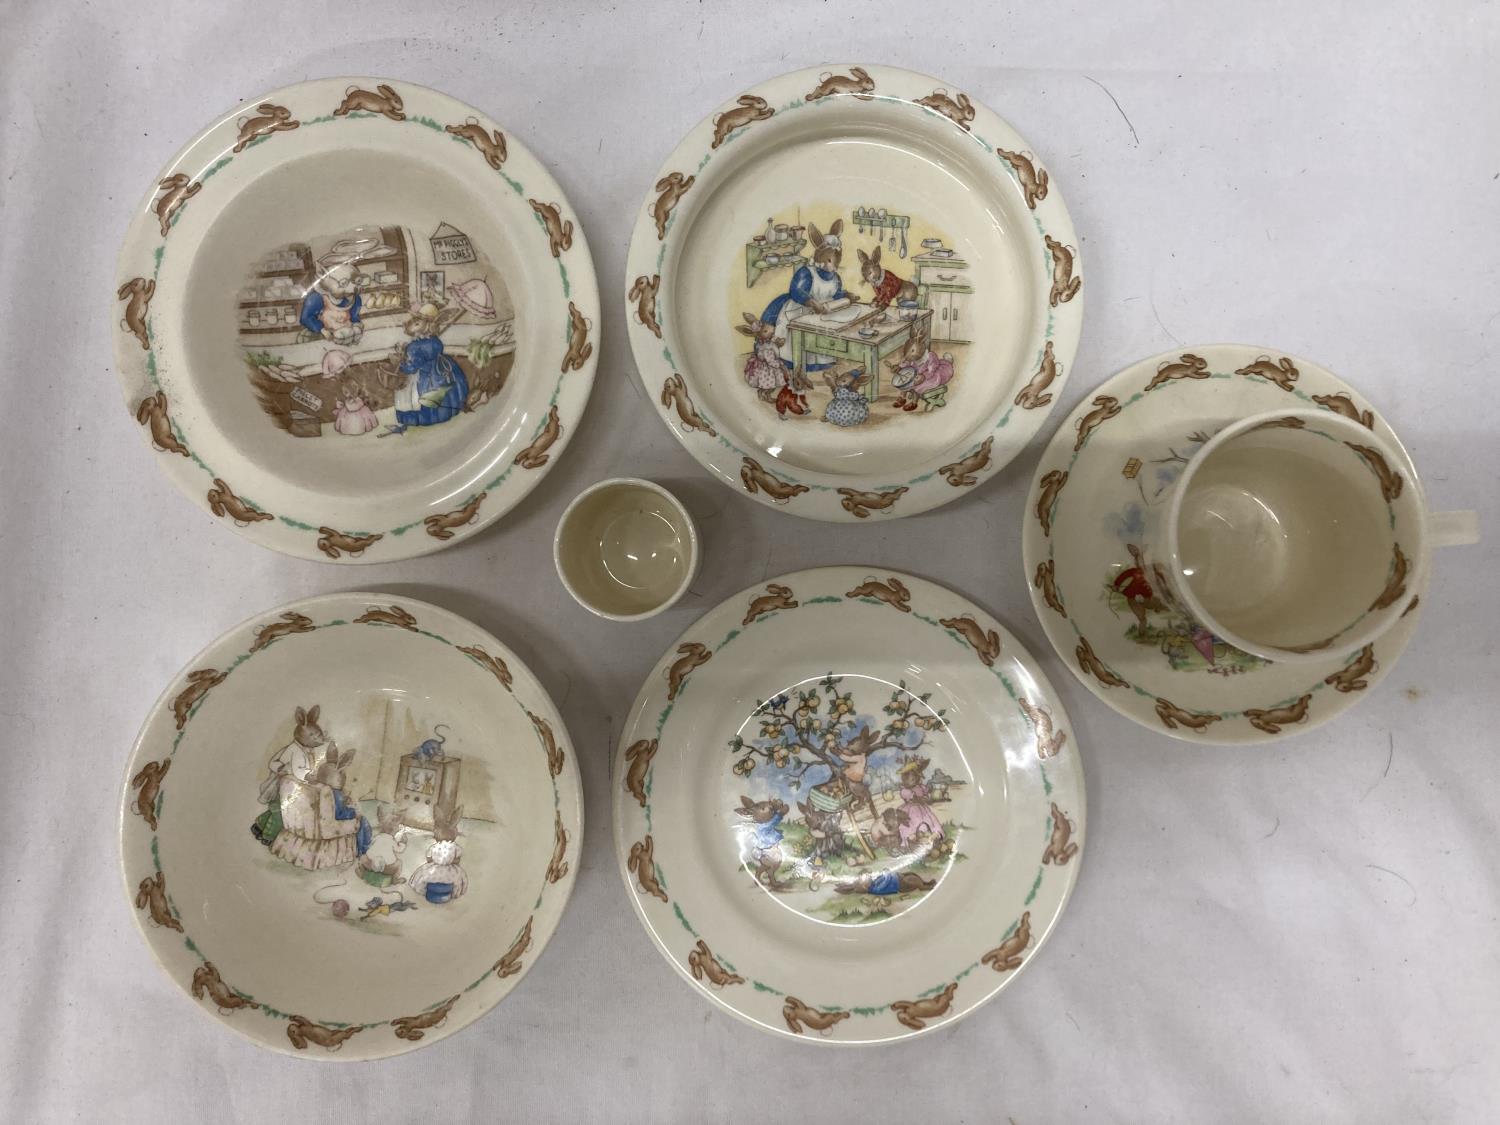 A COLLECTION OF ROYAL DOULTON 'BUNNYKINS' DINNERWARE TO INCLUDE BOWLS, PLATES, A CUP AND SAUCER - Image 2 of 3